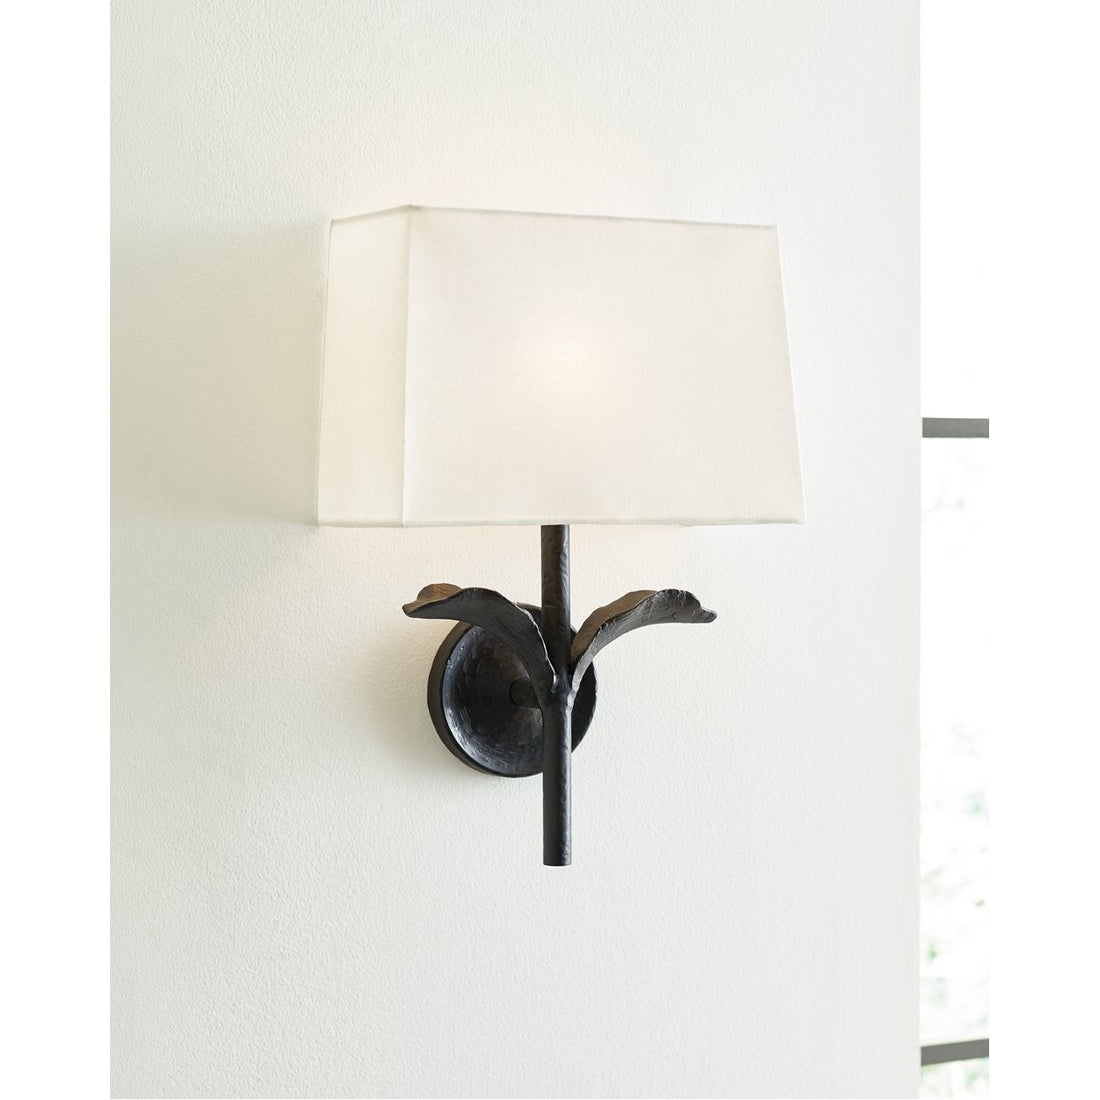 Feiss Georgia 1-Light Wall Sconce